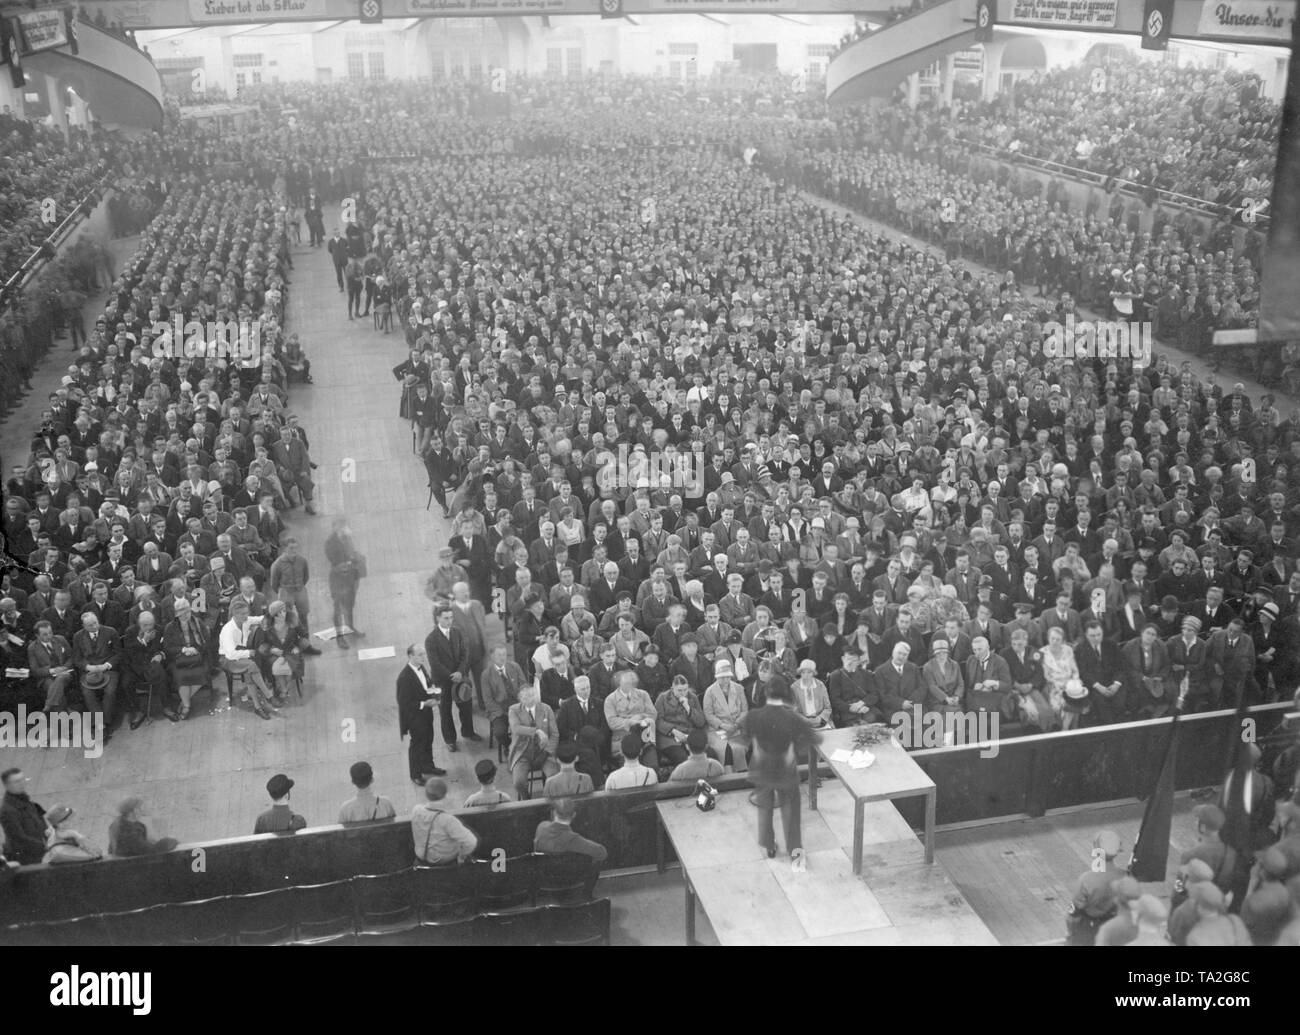 Joseph Goebbels speaks in front of the audience at a meeting of the NSDAP in the Sportpalast in Berlin. Stock Photo